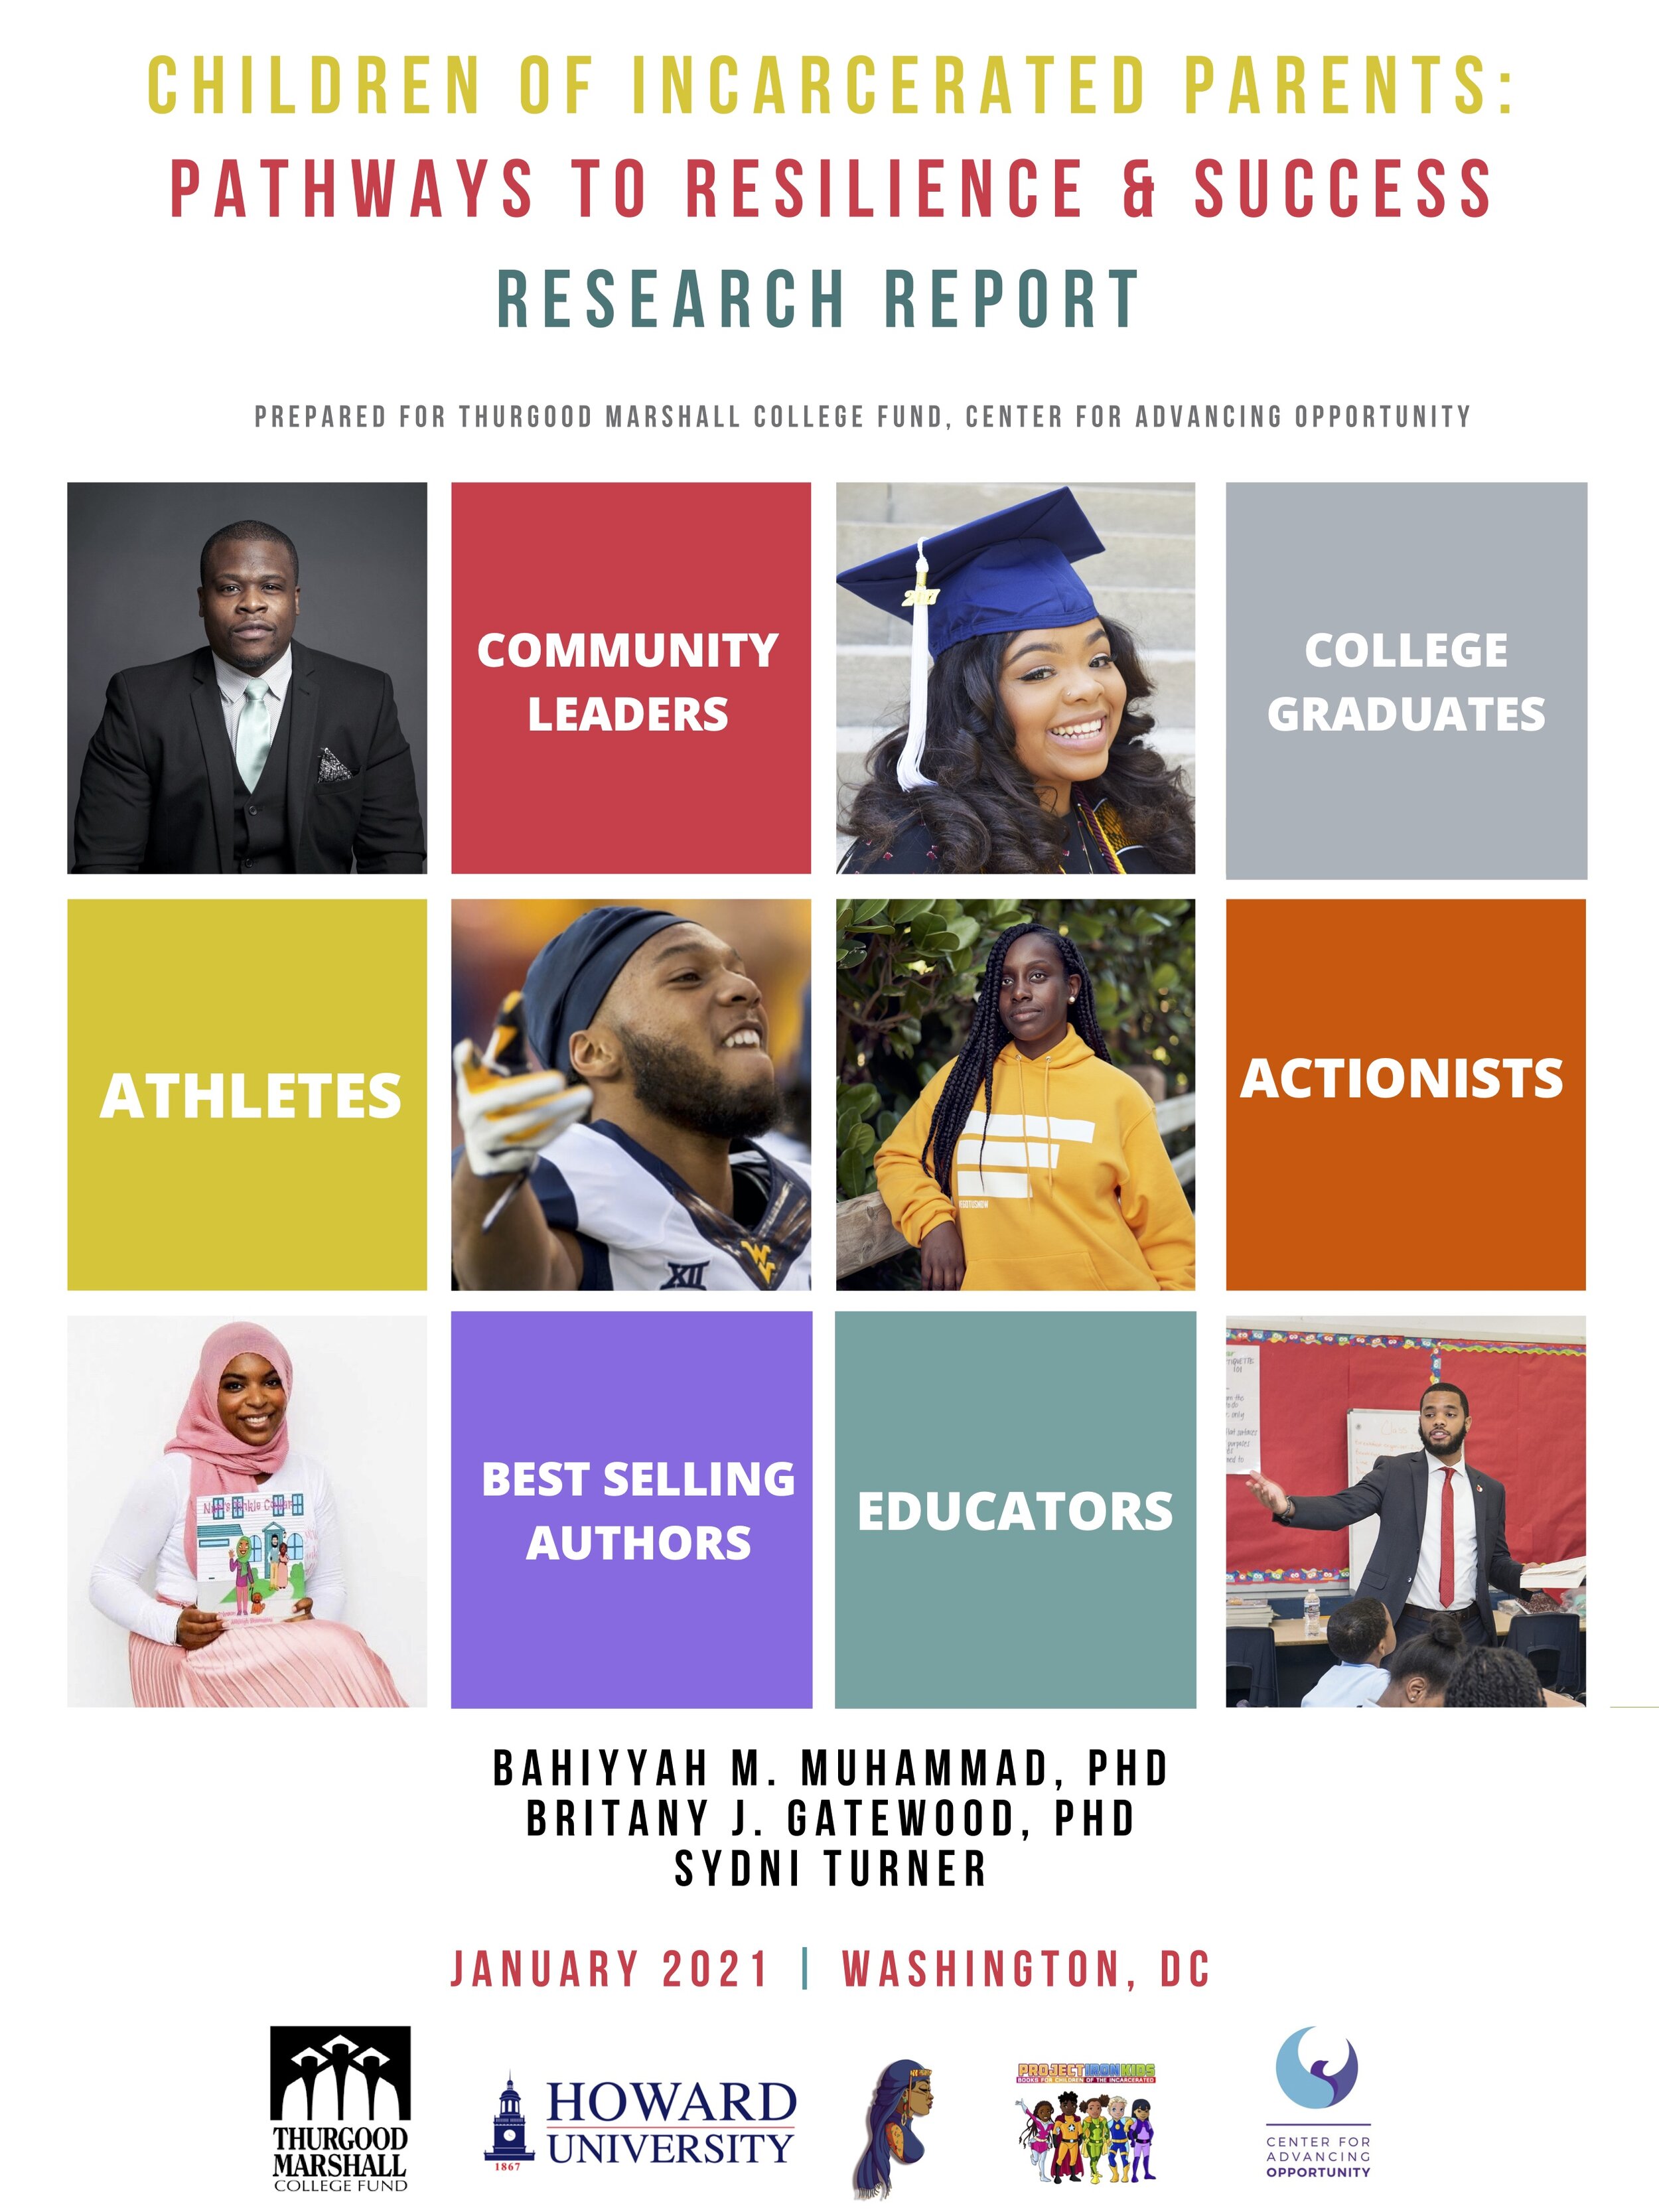 Children of Incarcerated Parents: Pathways to Resilience and Success Research Report